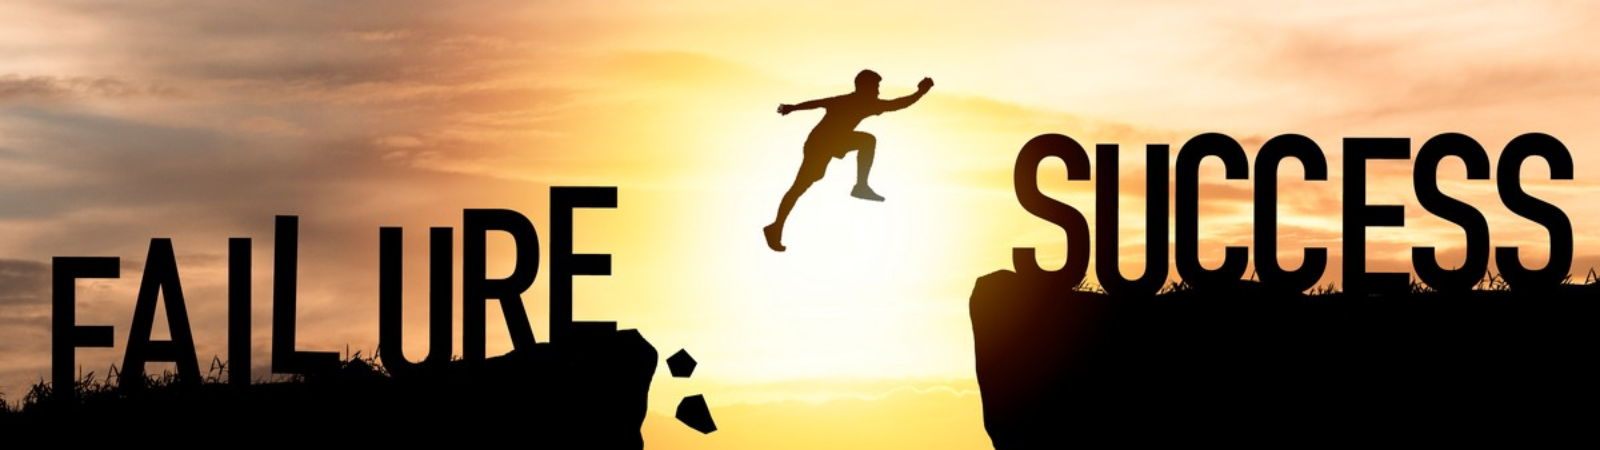 silhouette-man-jumping-from-failure-success-1600x900